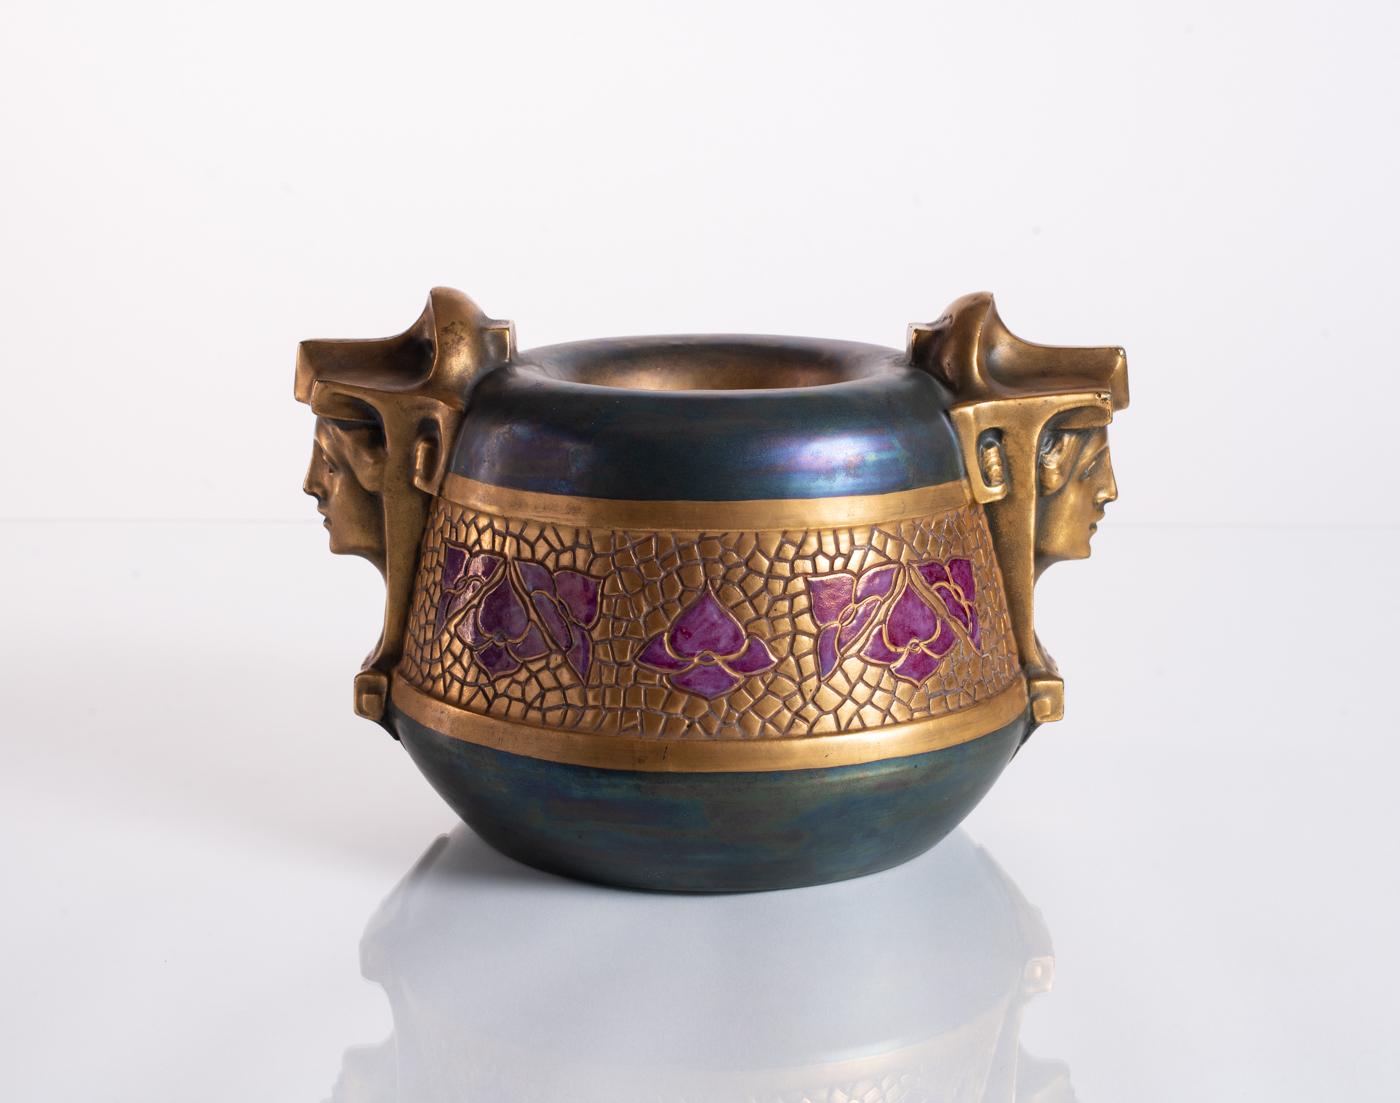 Unique earthenware bowl featuring a pair of golden Egyptian sphinxes and stylized purple flowers in an incised pattern, with an iridescent glaze of rich green, blue, and purple hues. Stamped in the base, and numbered.

Already well established